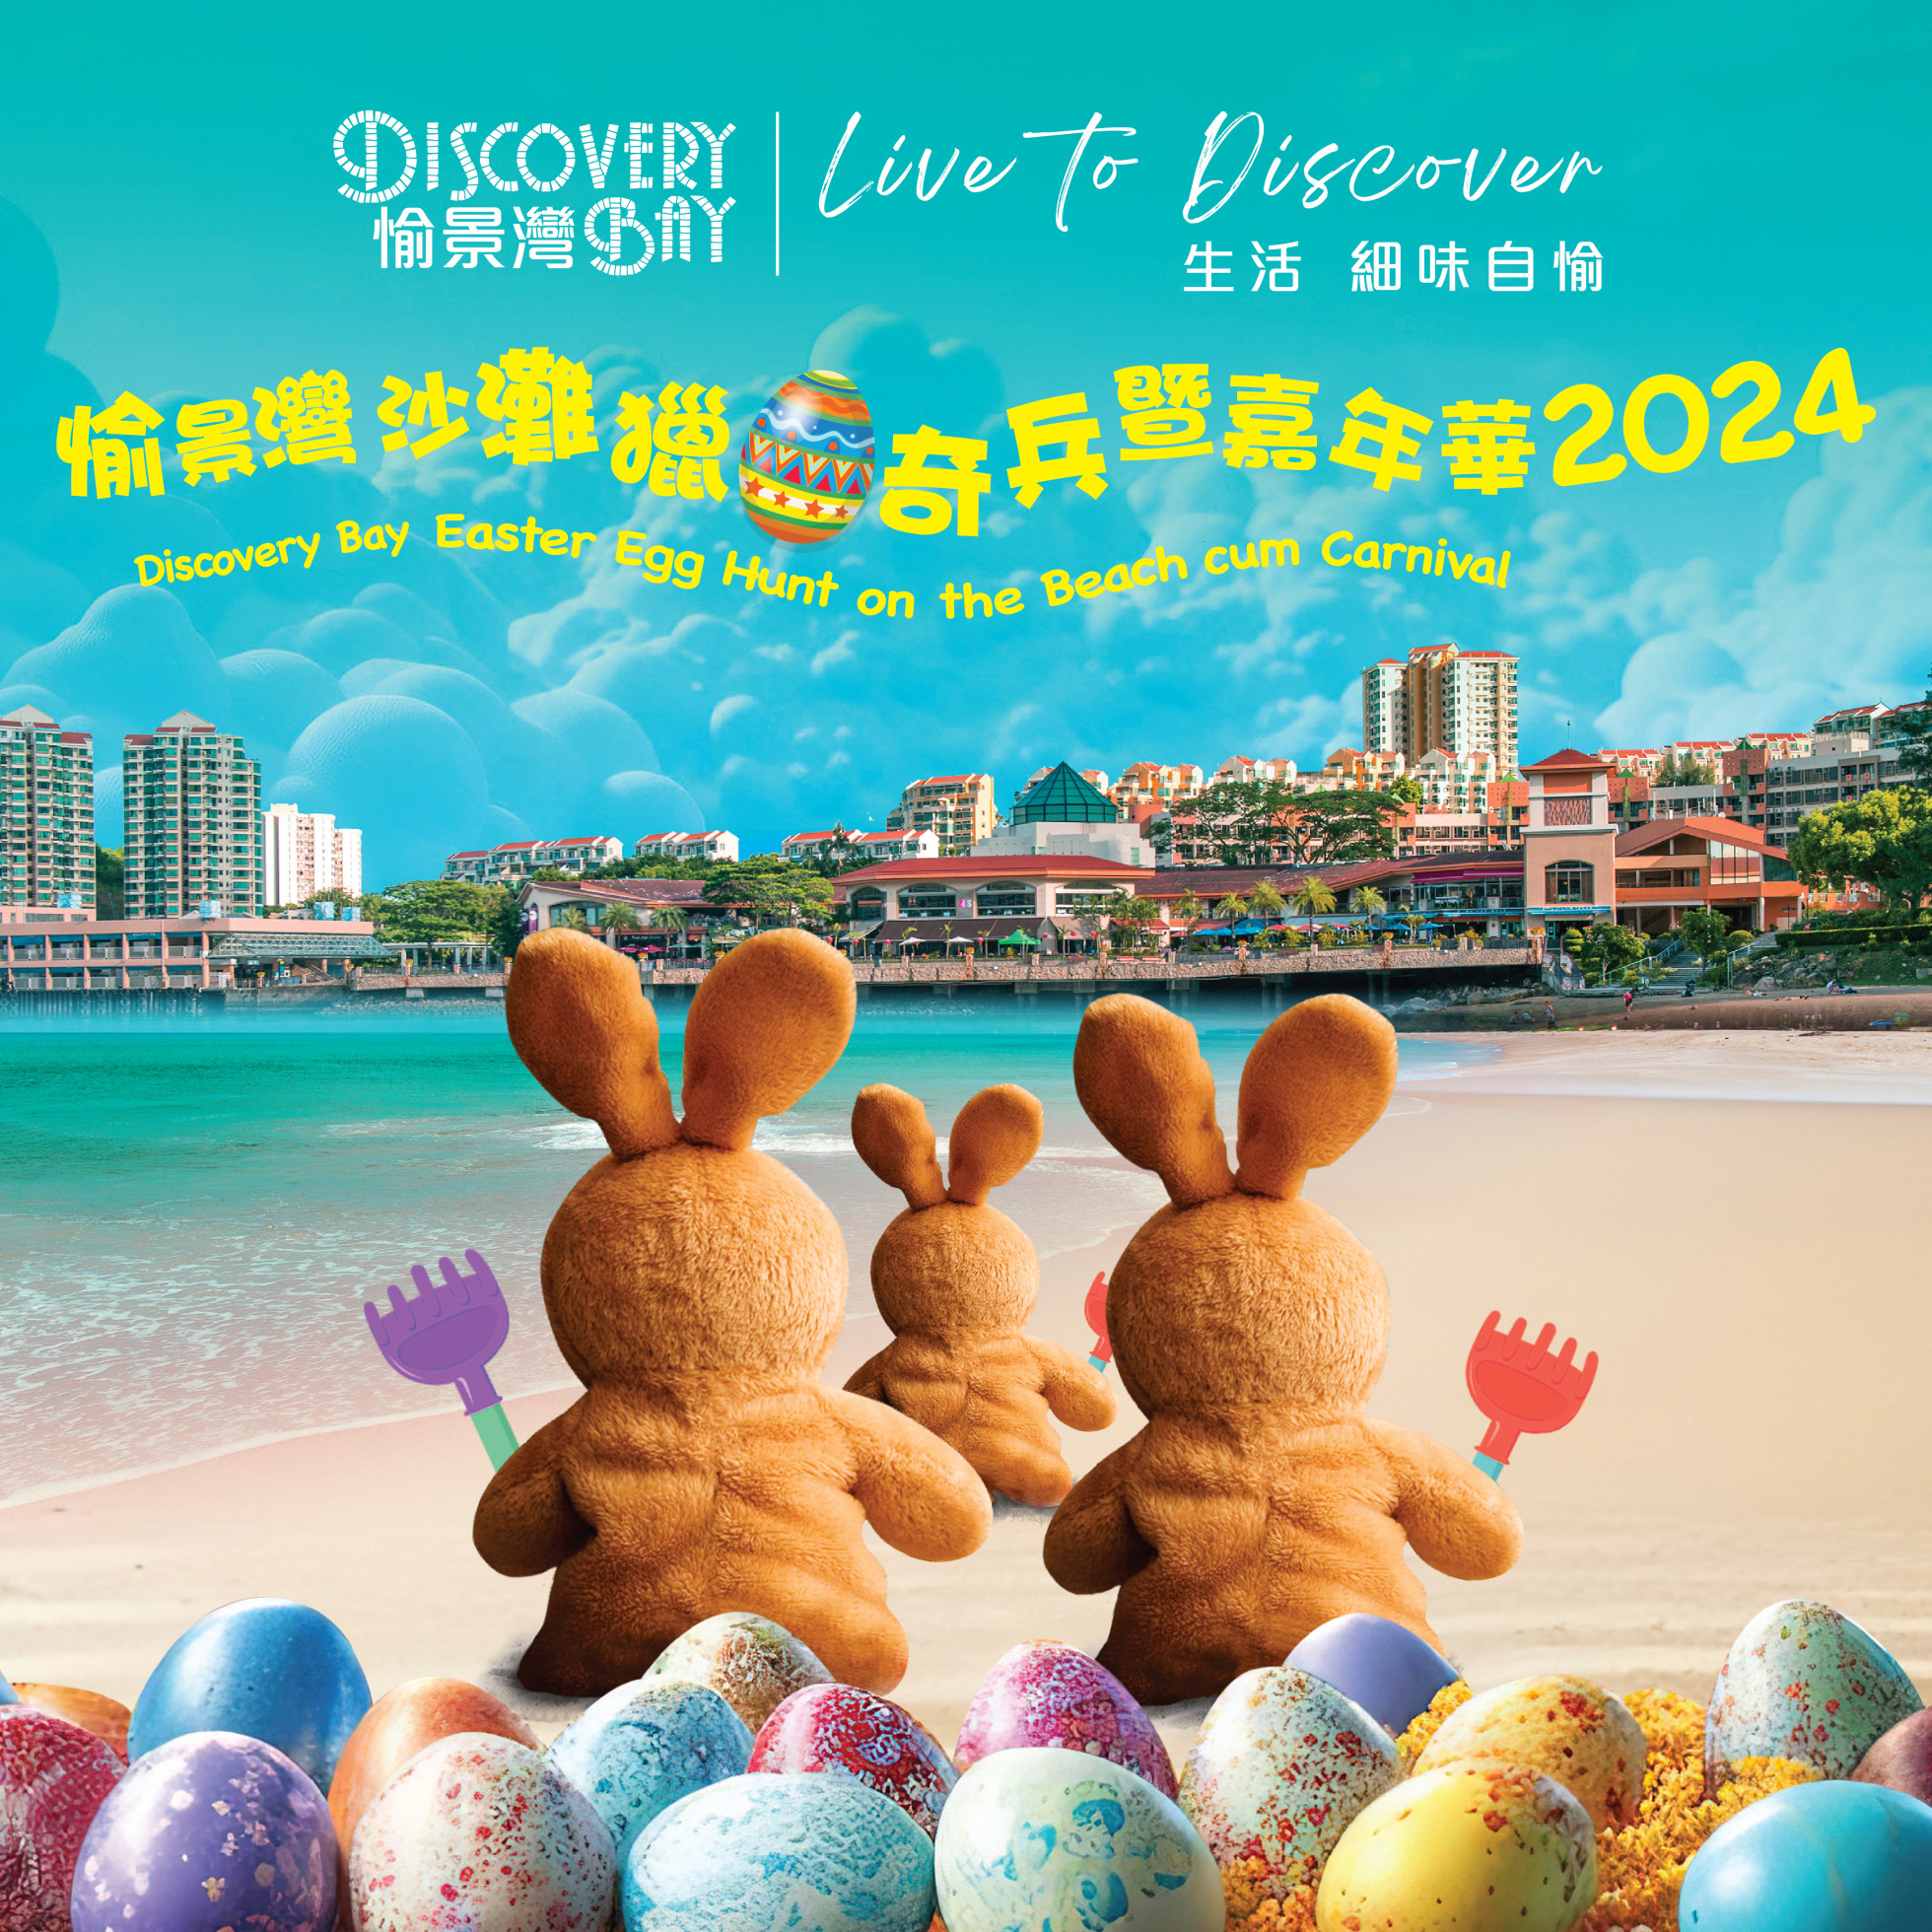 Discovery Bay Easter Egg Hunt on the Beach cum Carnival